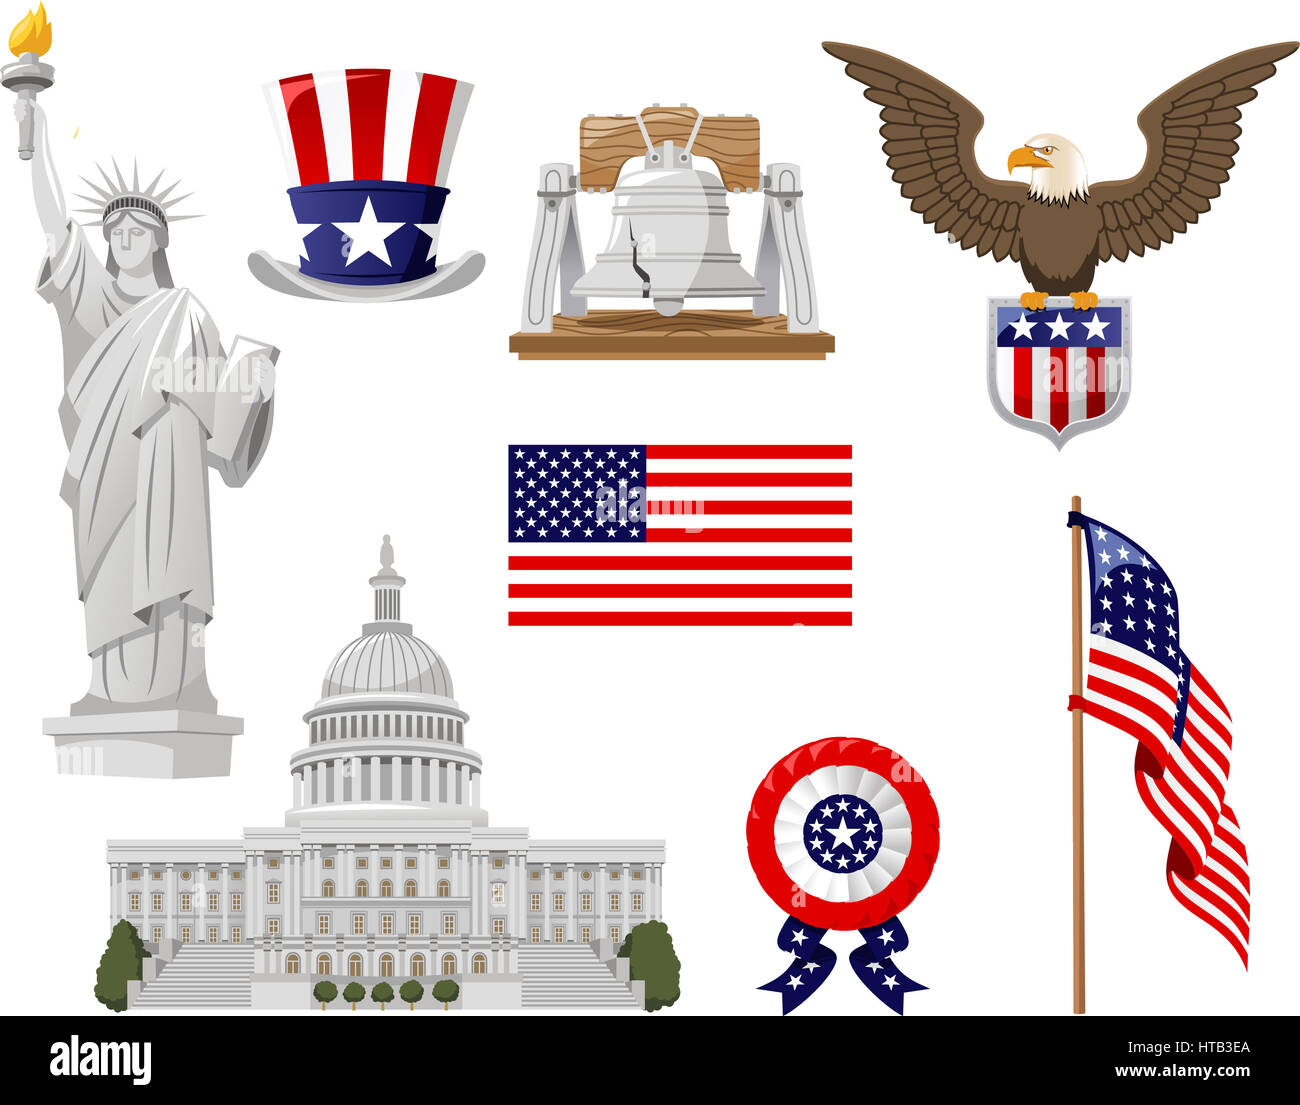 American Culture vector illustration icons, such as top hat, bell, liberty statue, flagged country, flag, white house collection set. Stock Photo